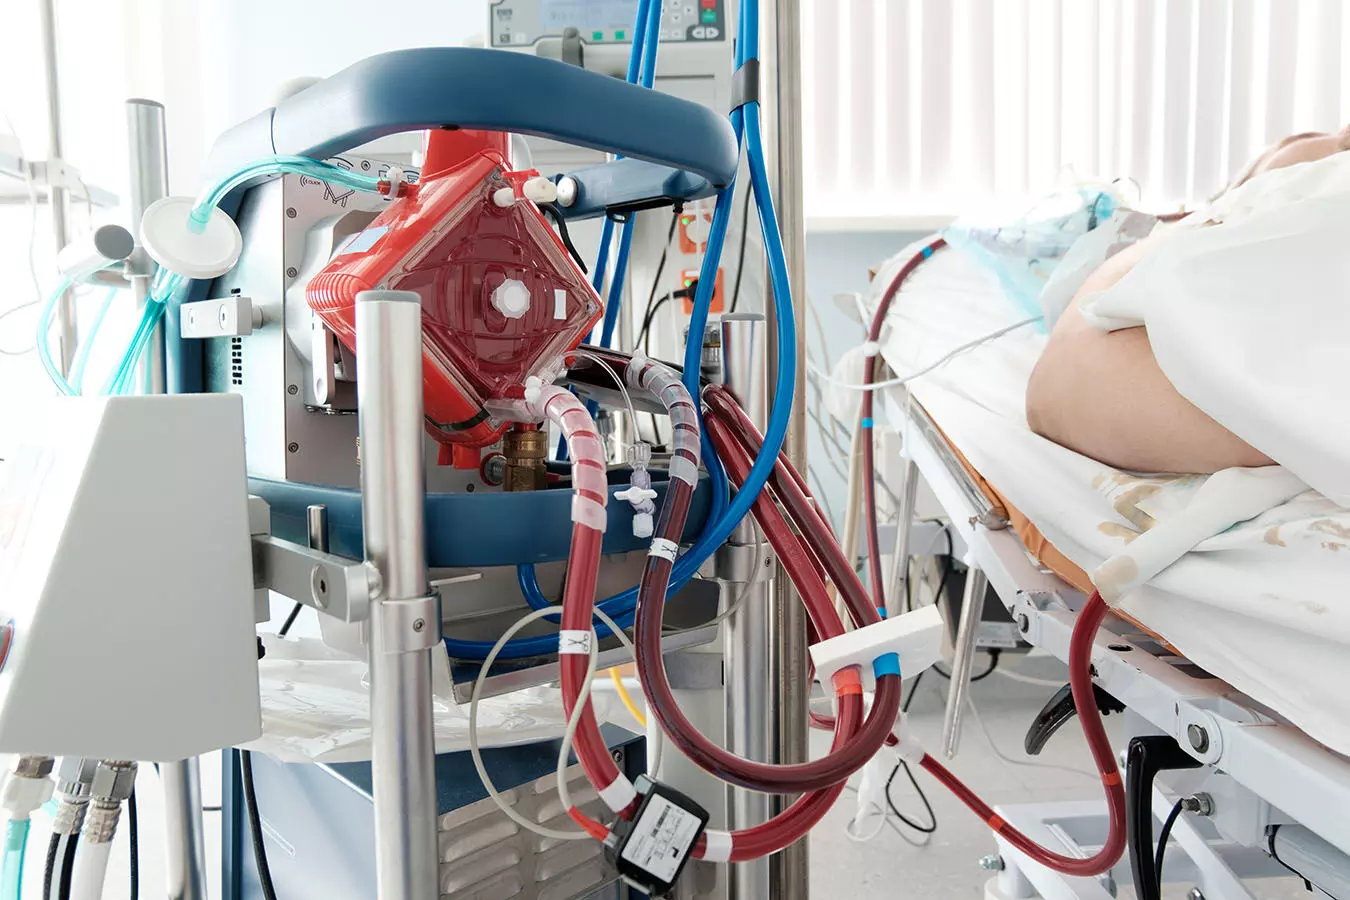 Red blood cell transfusions can increase mortality rates of newborns on ECMO, study finds